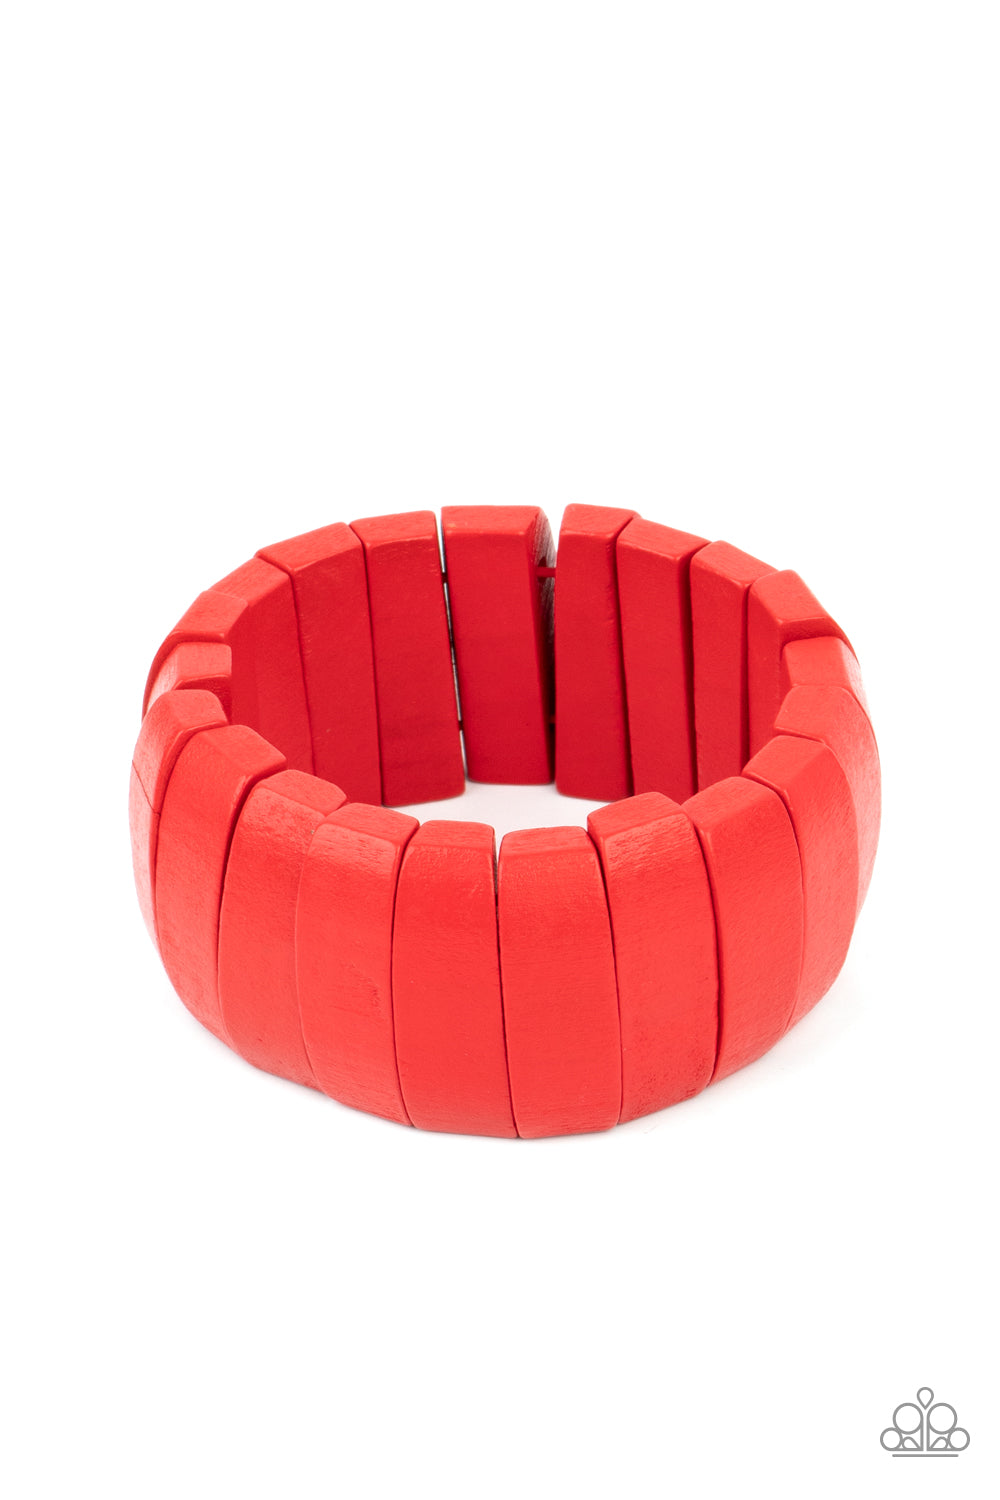 Raise The BARBADOS Red Bracelet - Paparazzi Accessories. Painted in fiery finishes, a bold collection of red wooden beads are threaded along stretchy bands around the wrist for a colorful display.  Sold as one individual bracelet.